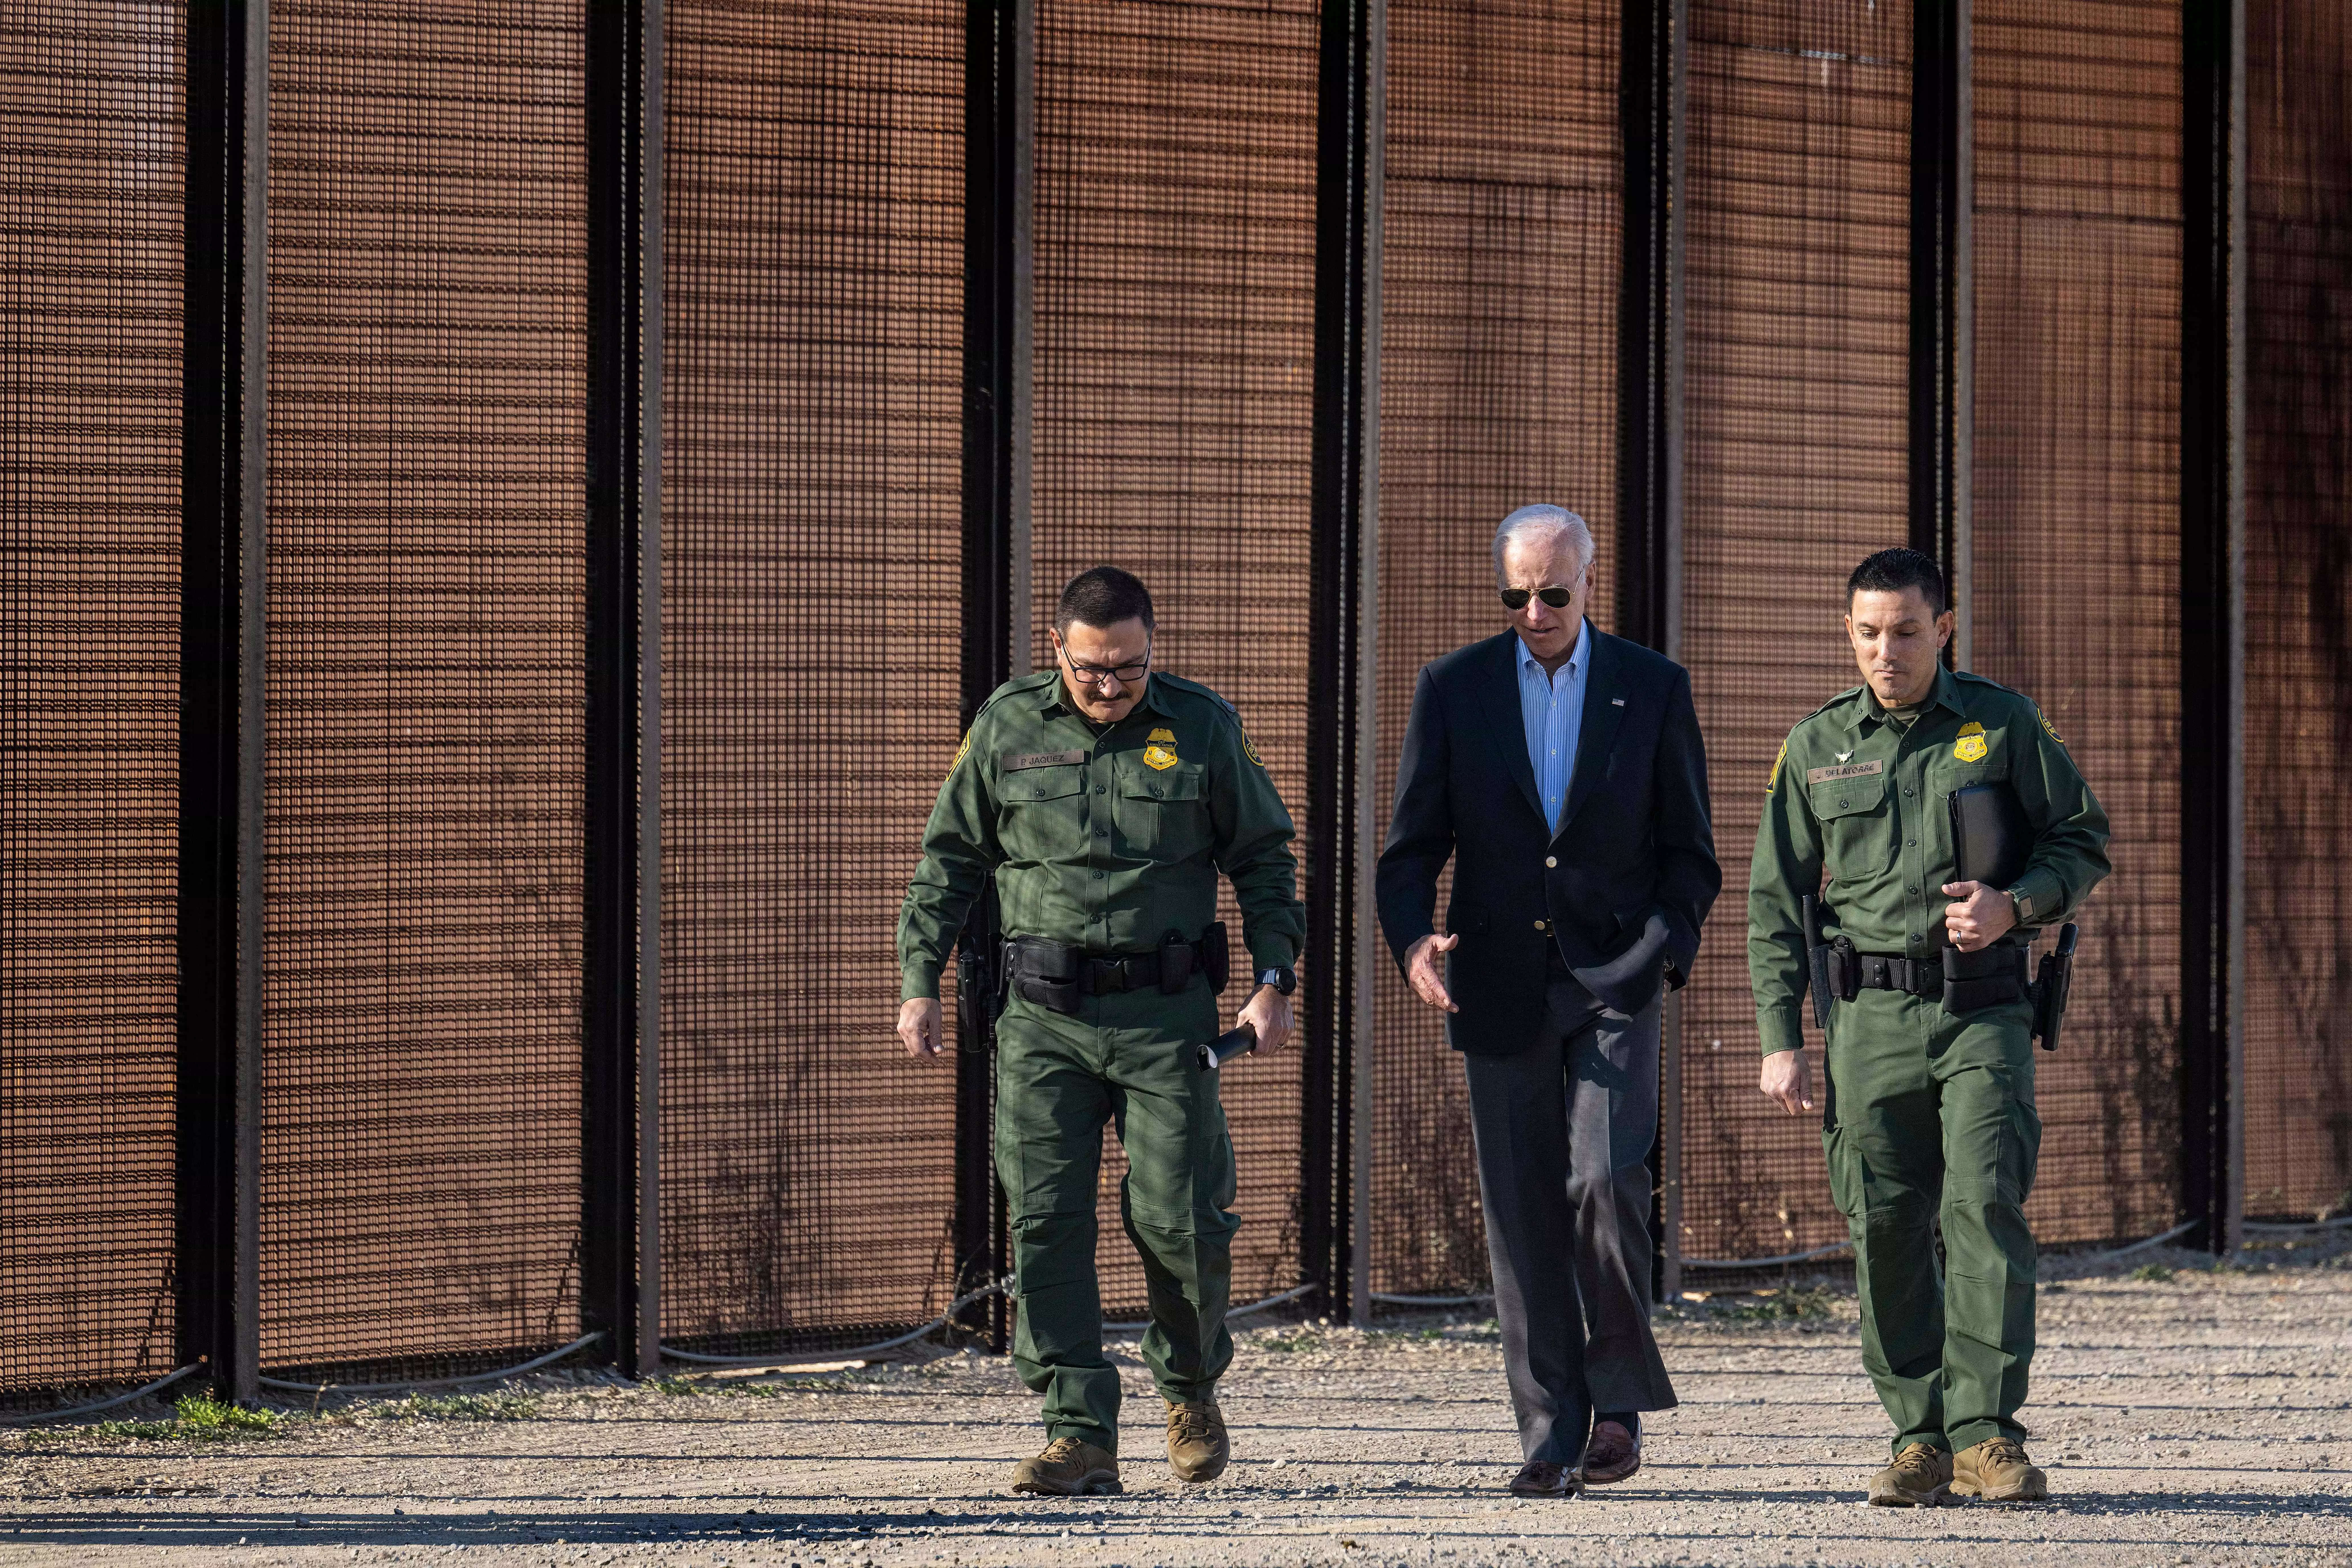 US President Joe Biden speaks with US Customs and Border Protection officers as he visits the US-Mexico border in El Paso.